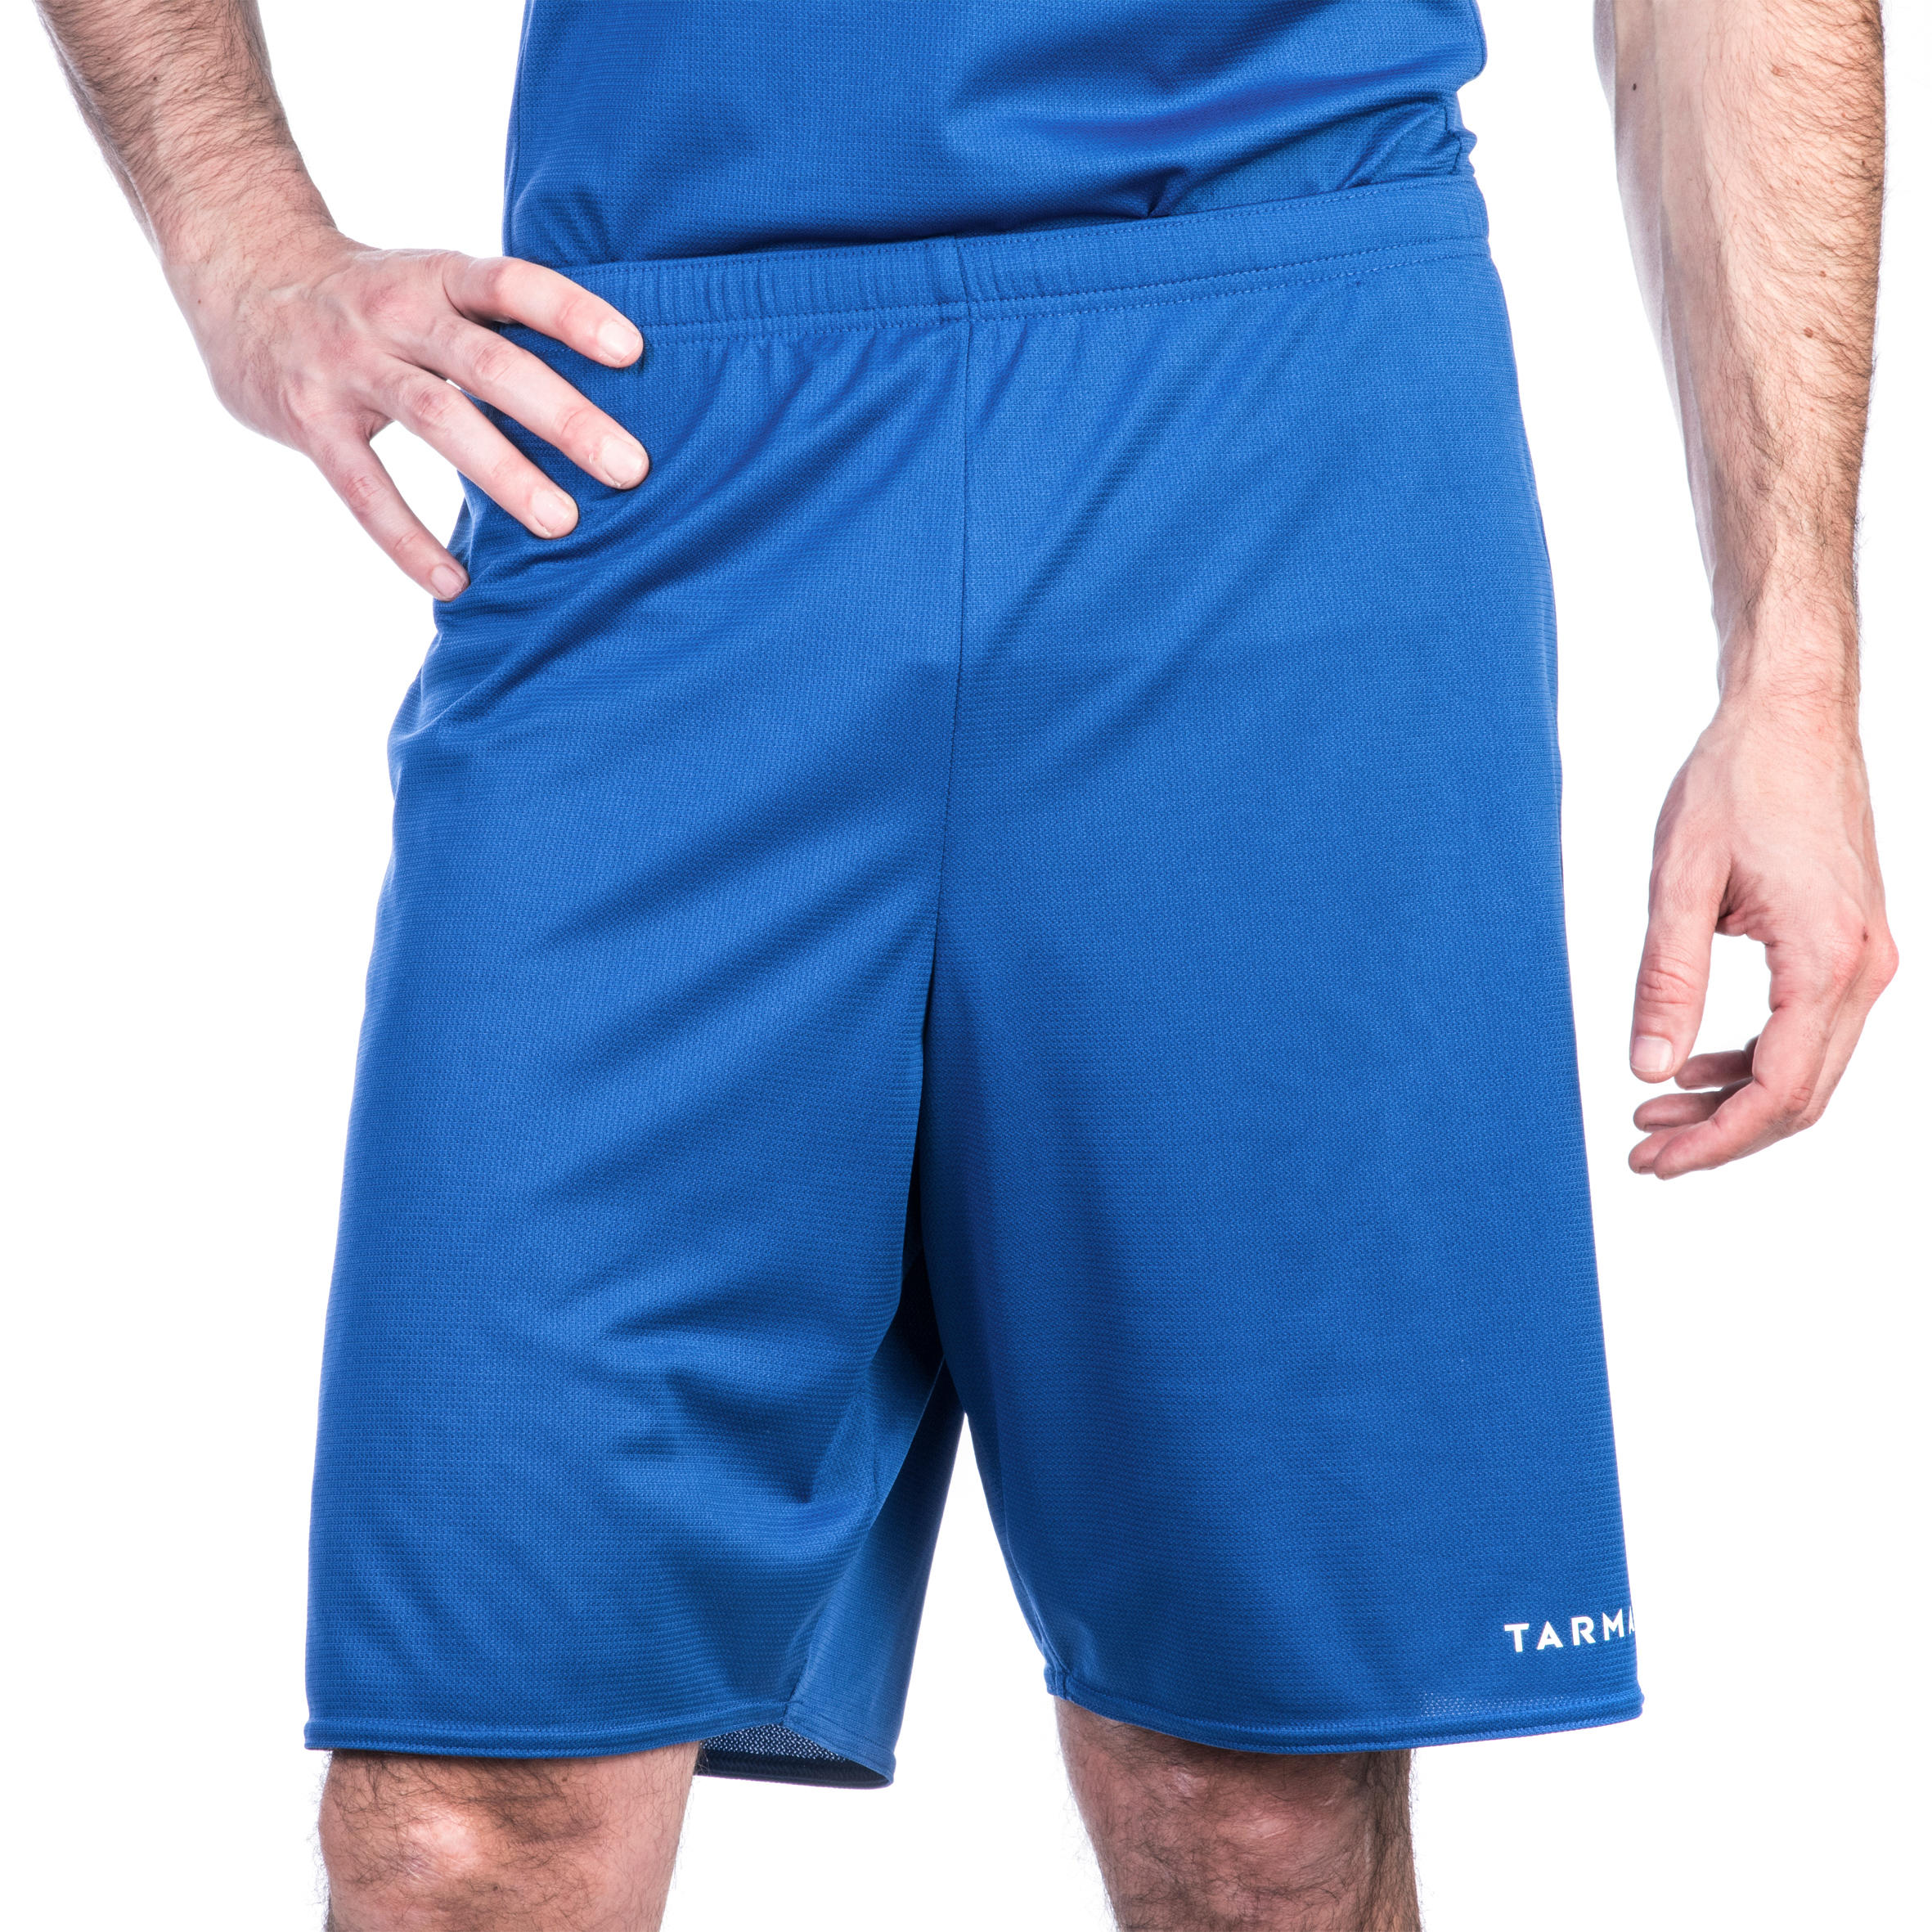 Mens Quick Dry Gym Workout Shorts Men For Bodybuilding, Jogging, And Beach  Fashion Loose Fit Summer Pants Style #230510 From Kong00, $12.77 |  DHgate.Com